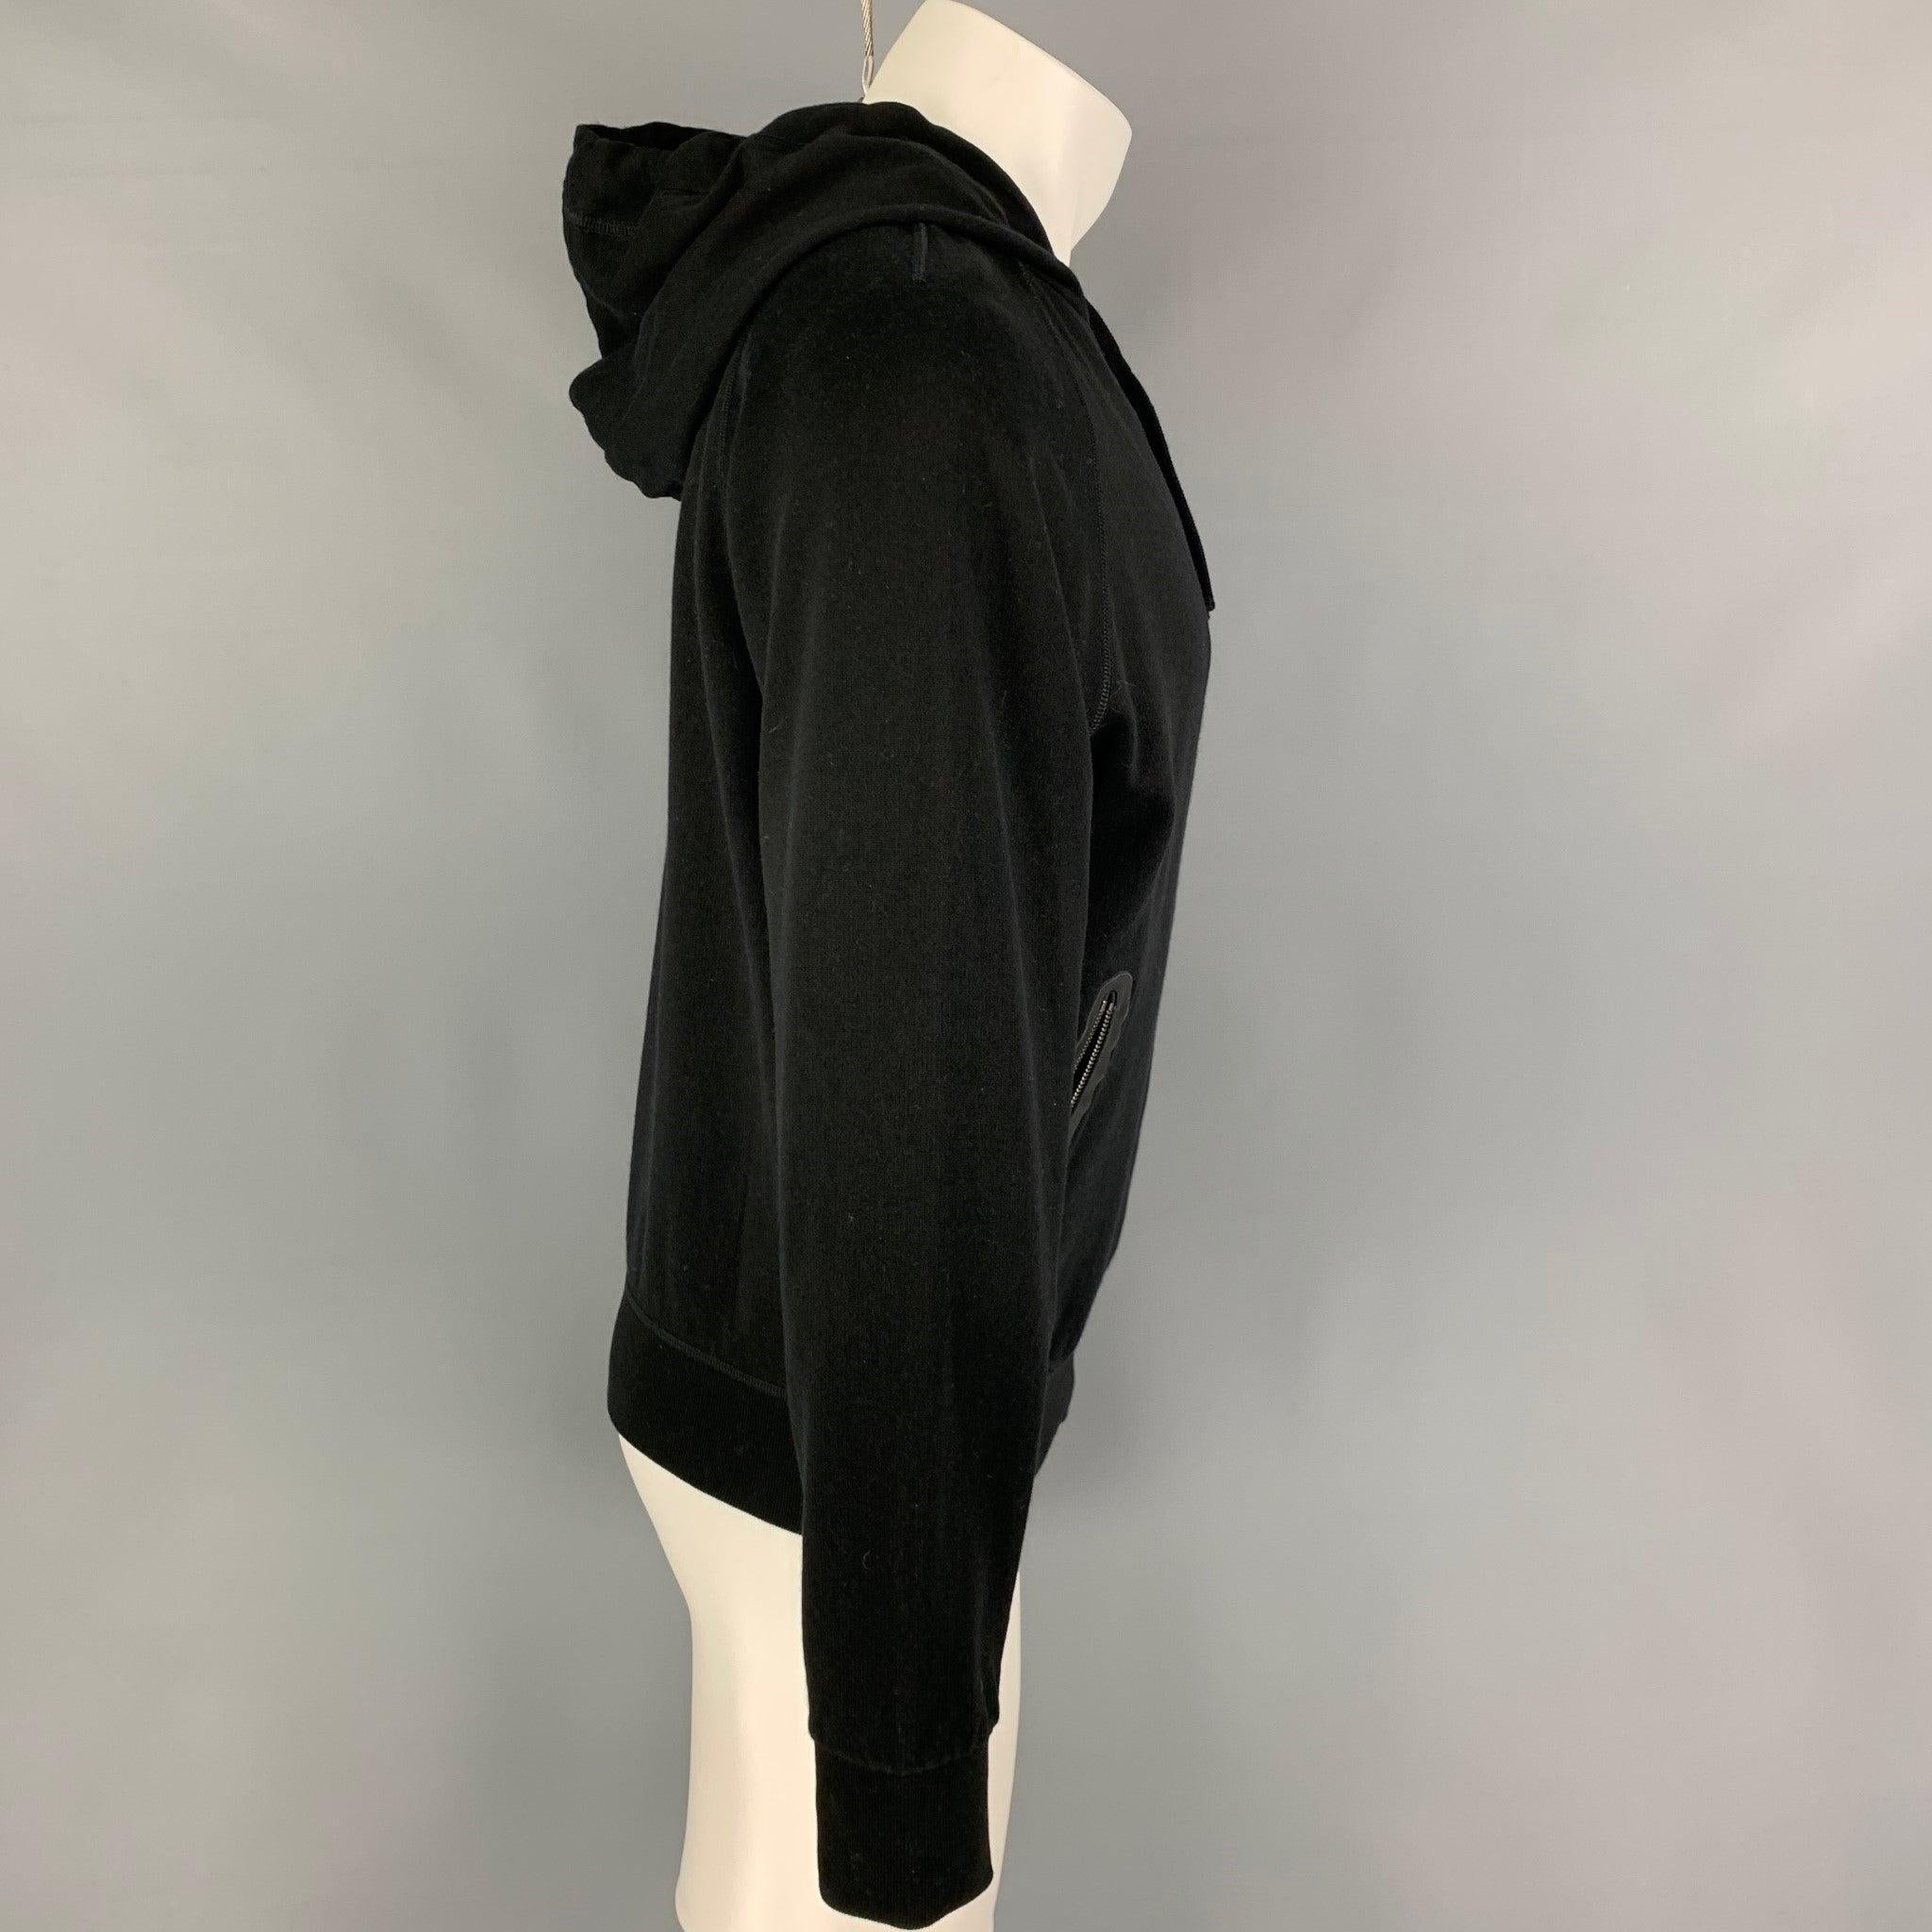 BOTTEGA VENETA sweatshirt comes in a black cotton / wool featuring a hooded style, leather trim, zipper pockets, and a full zip up closure. Made in Italy.
Excellent
Pre-Owned Condition. 

Marked:   50 

Measurements: 
 
Shoulder: 16 inches Chest: 40